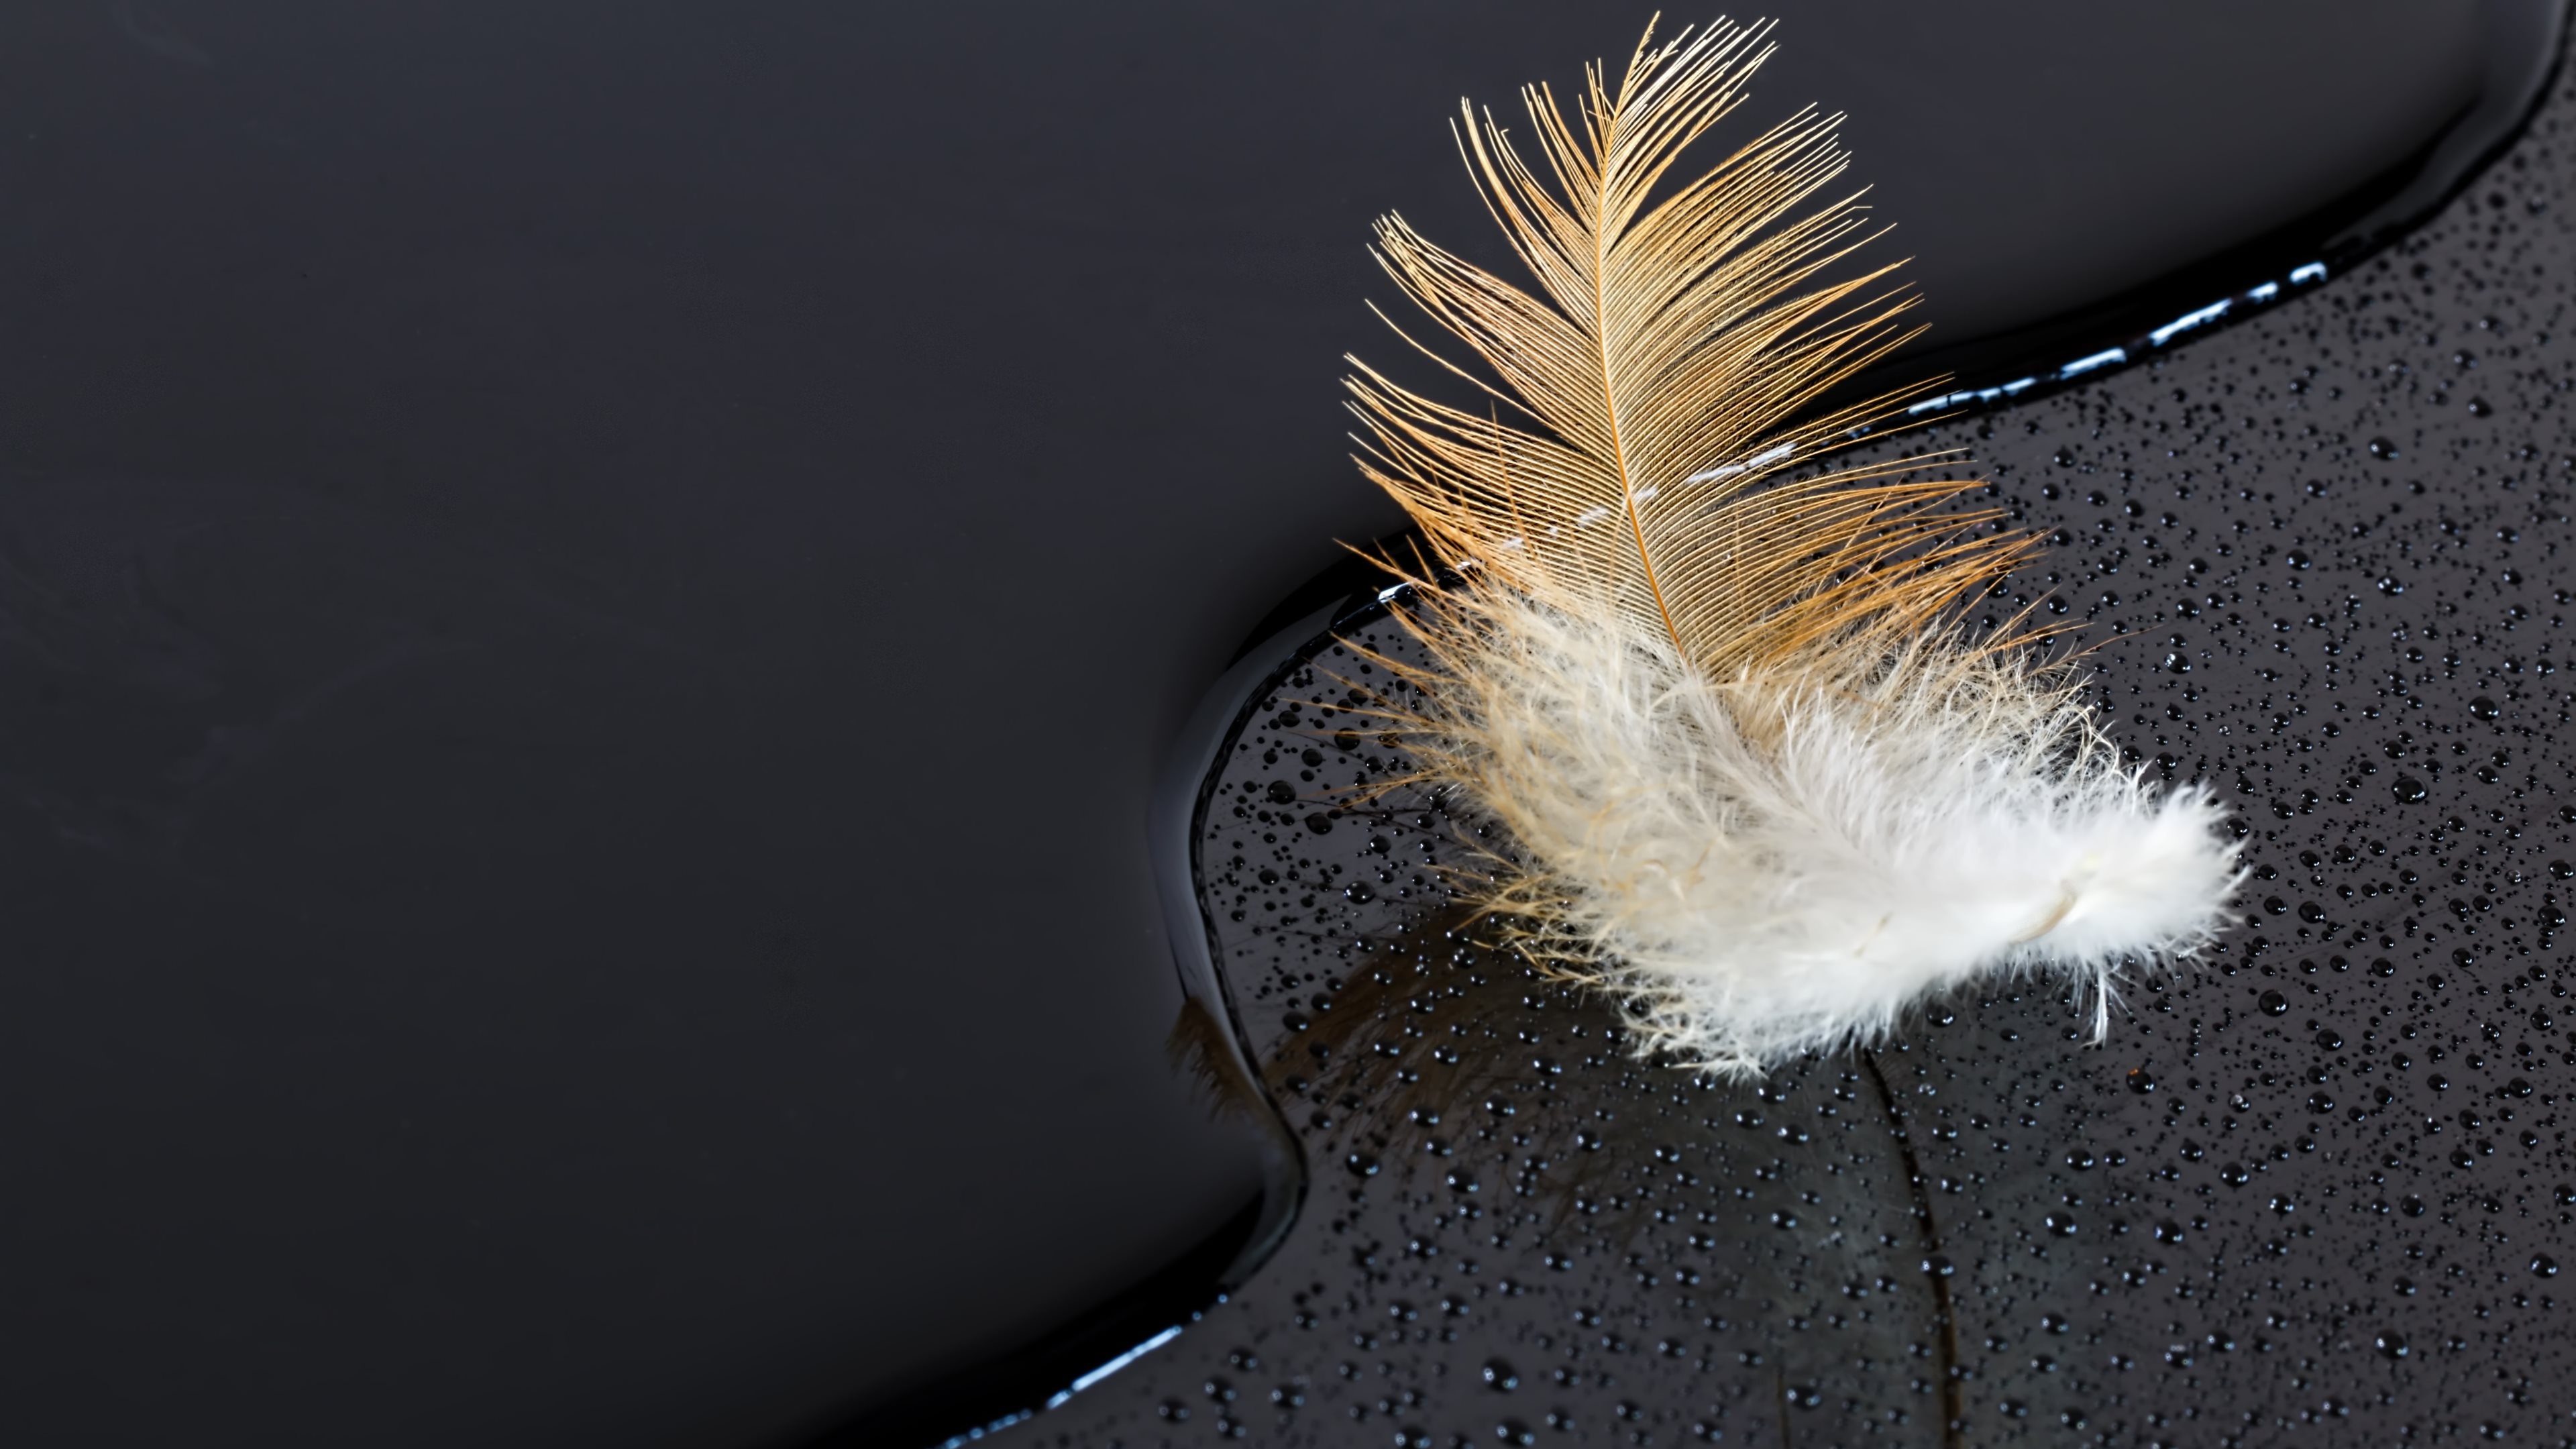 Feather: One of the many soft, light things that cover a bird's body. 3840x2160 4K Background.